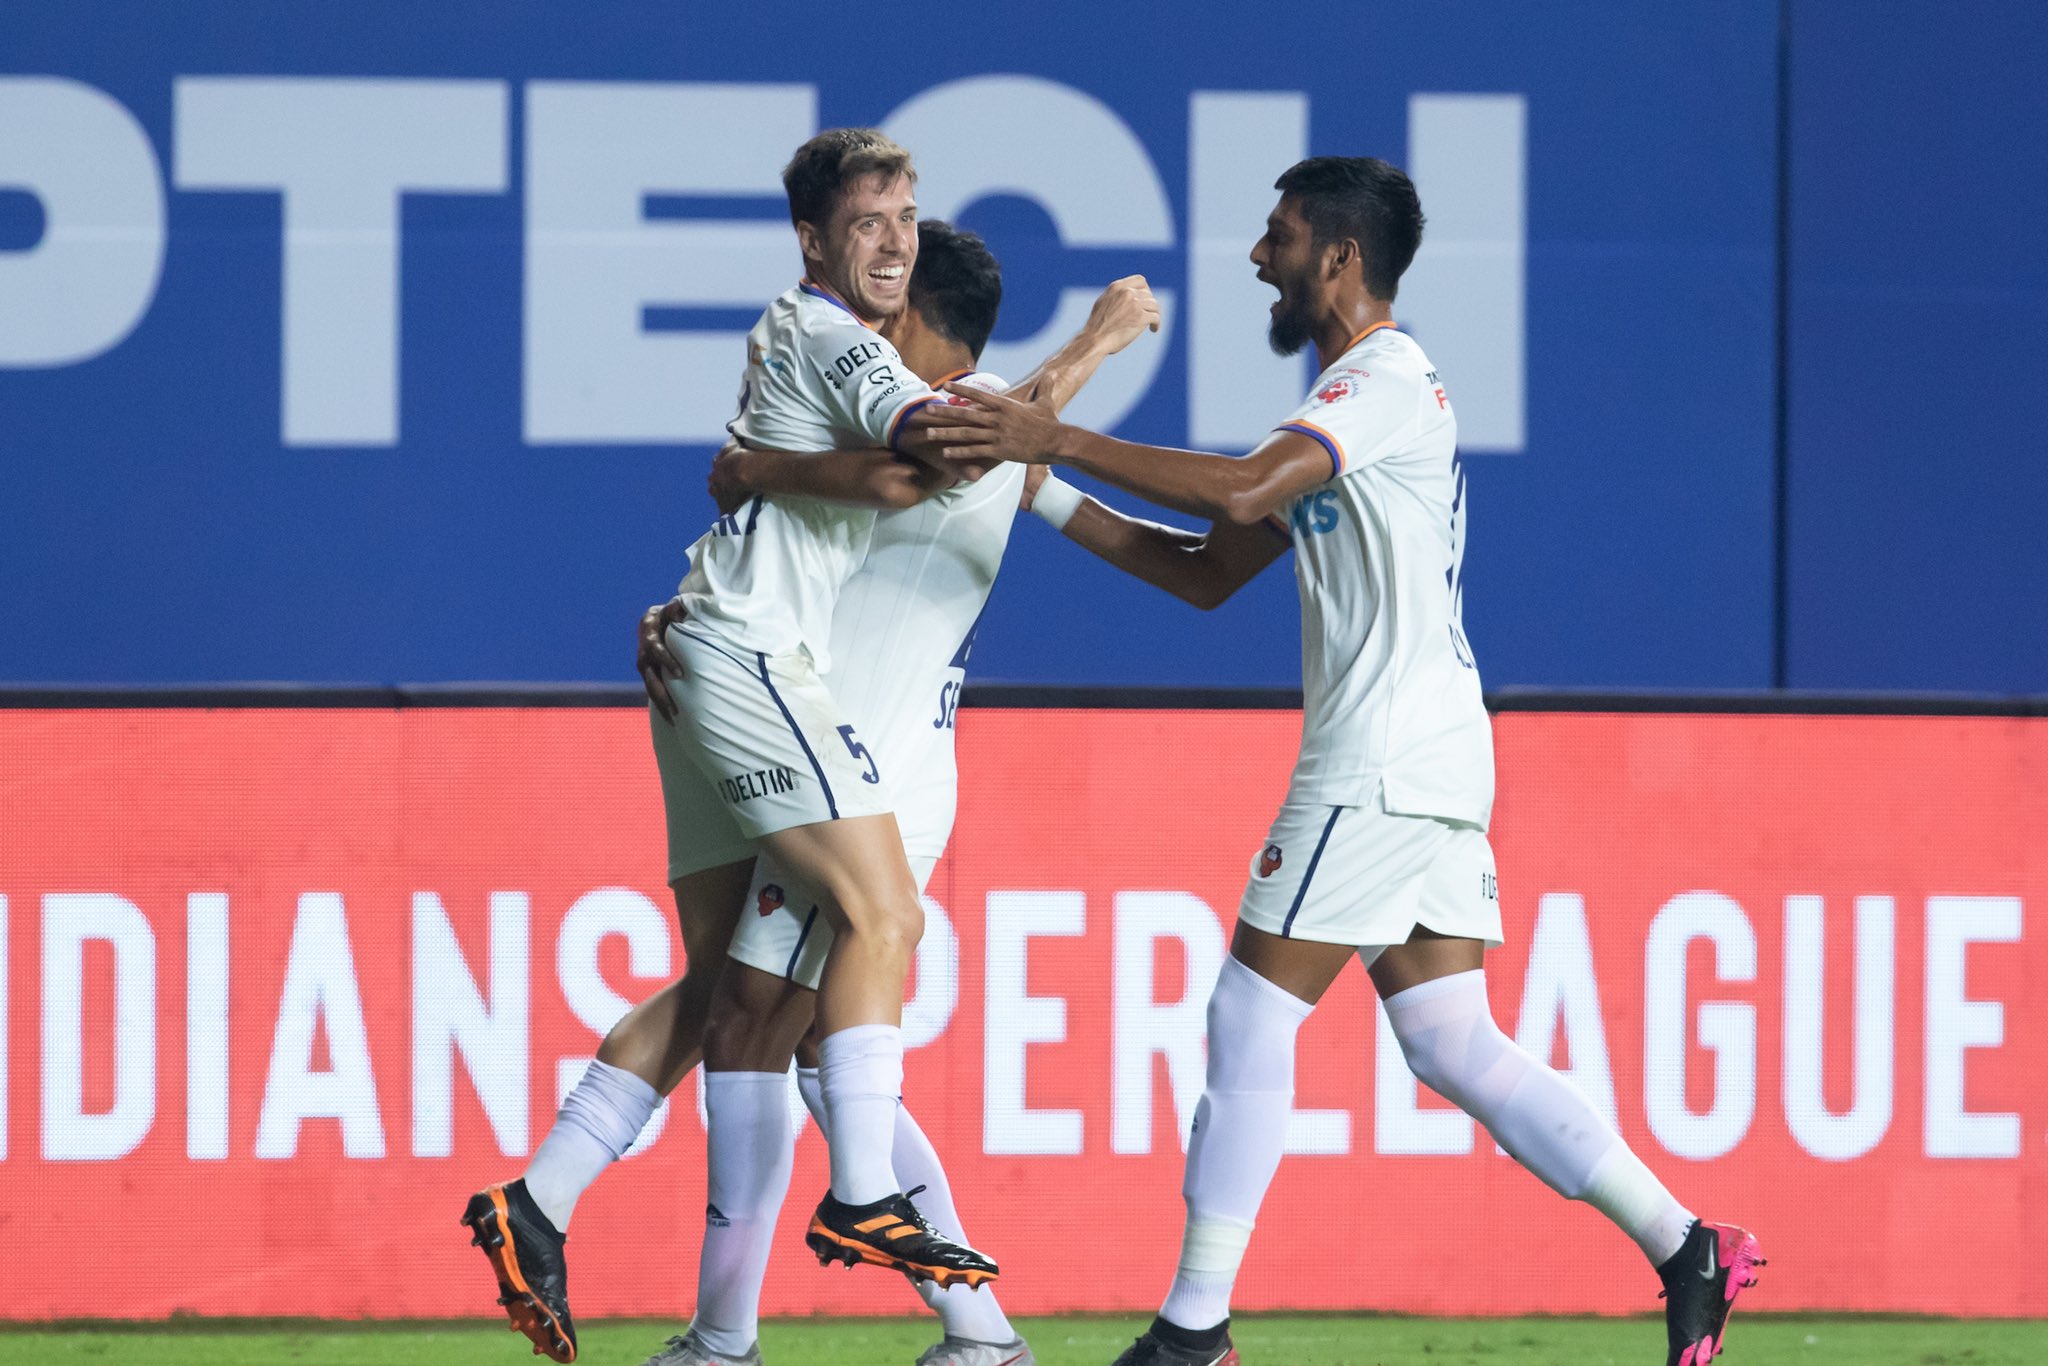 ISL 2021-22: Clinical FC Goa thumps SC East Bengal 4-3 in a seven goal thriller